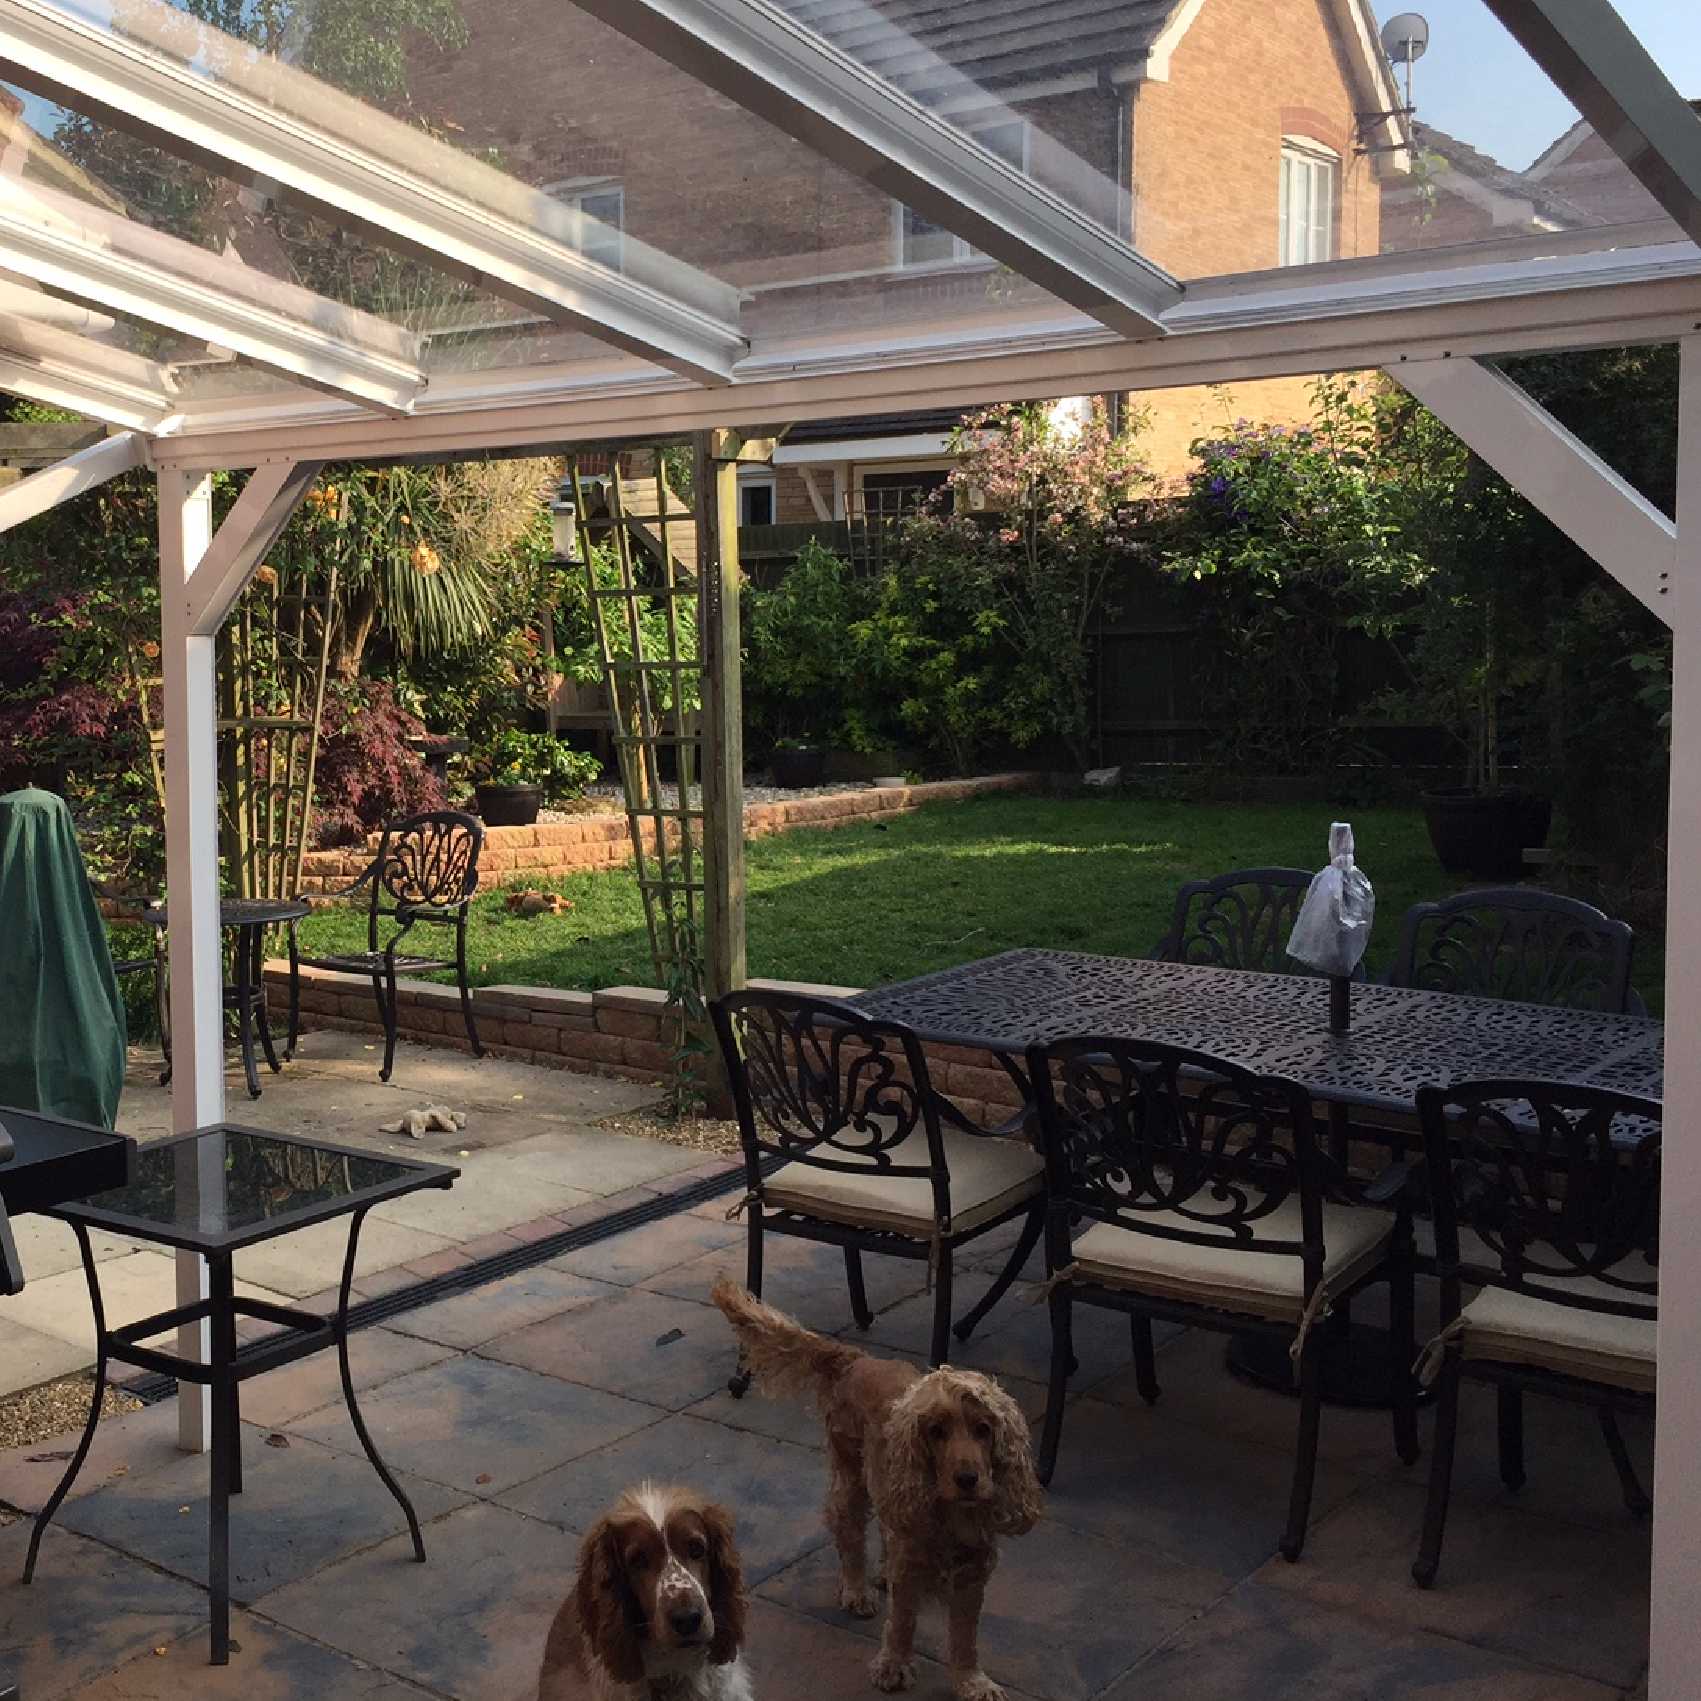 Affordable Omega Smart Lean-To Canopy, White UNGLAZED for 6mm Glazing - 5.6m (W) x 2.5m (P), (3) Supporting Posts